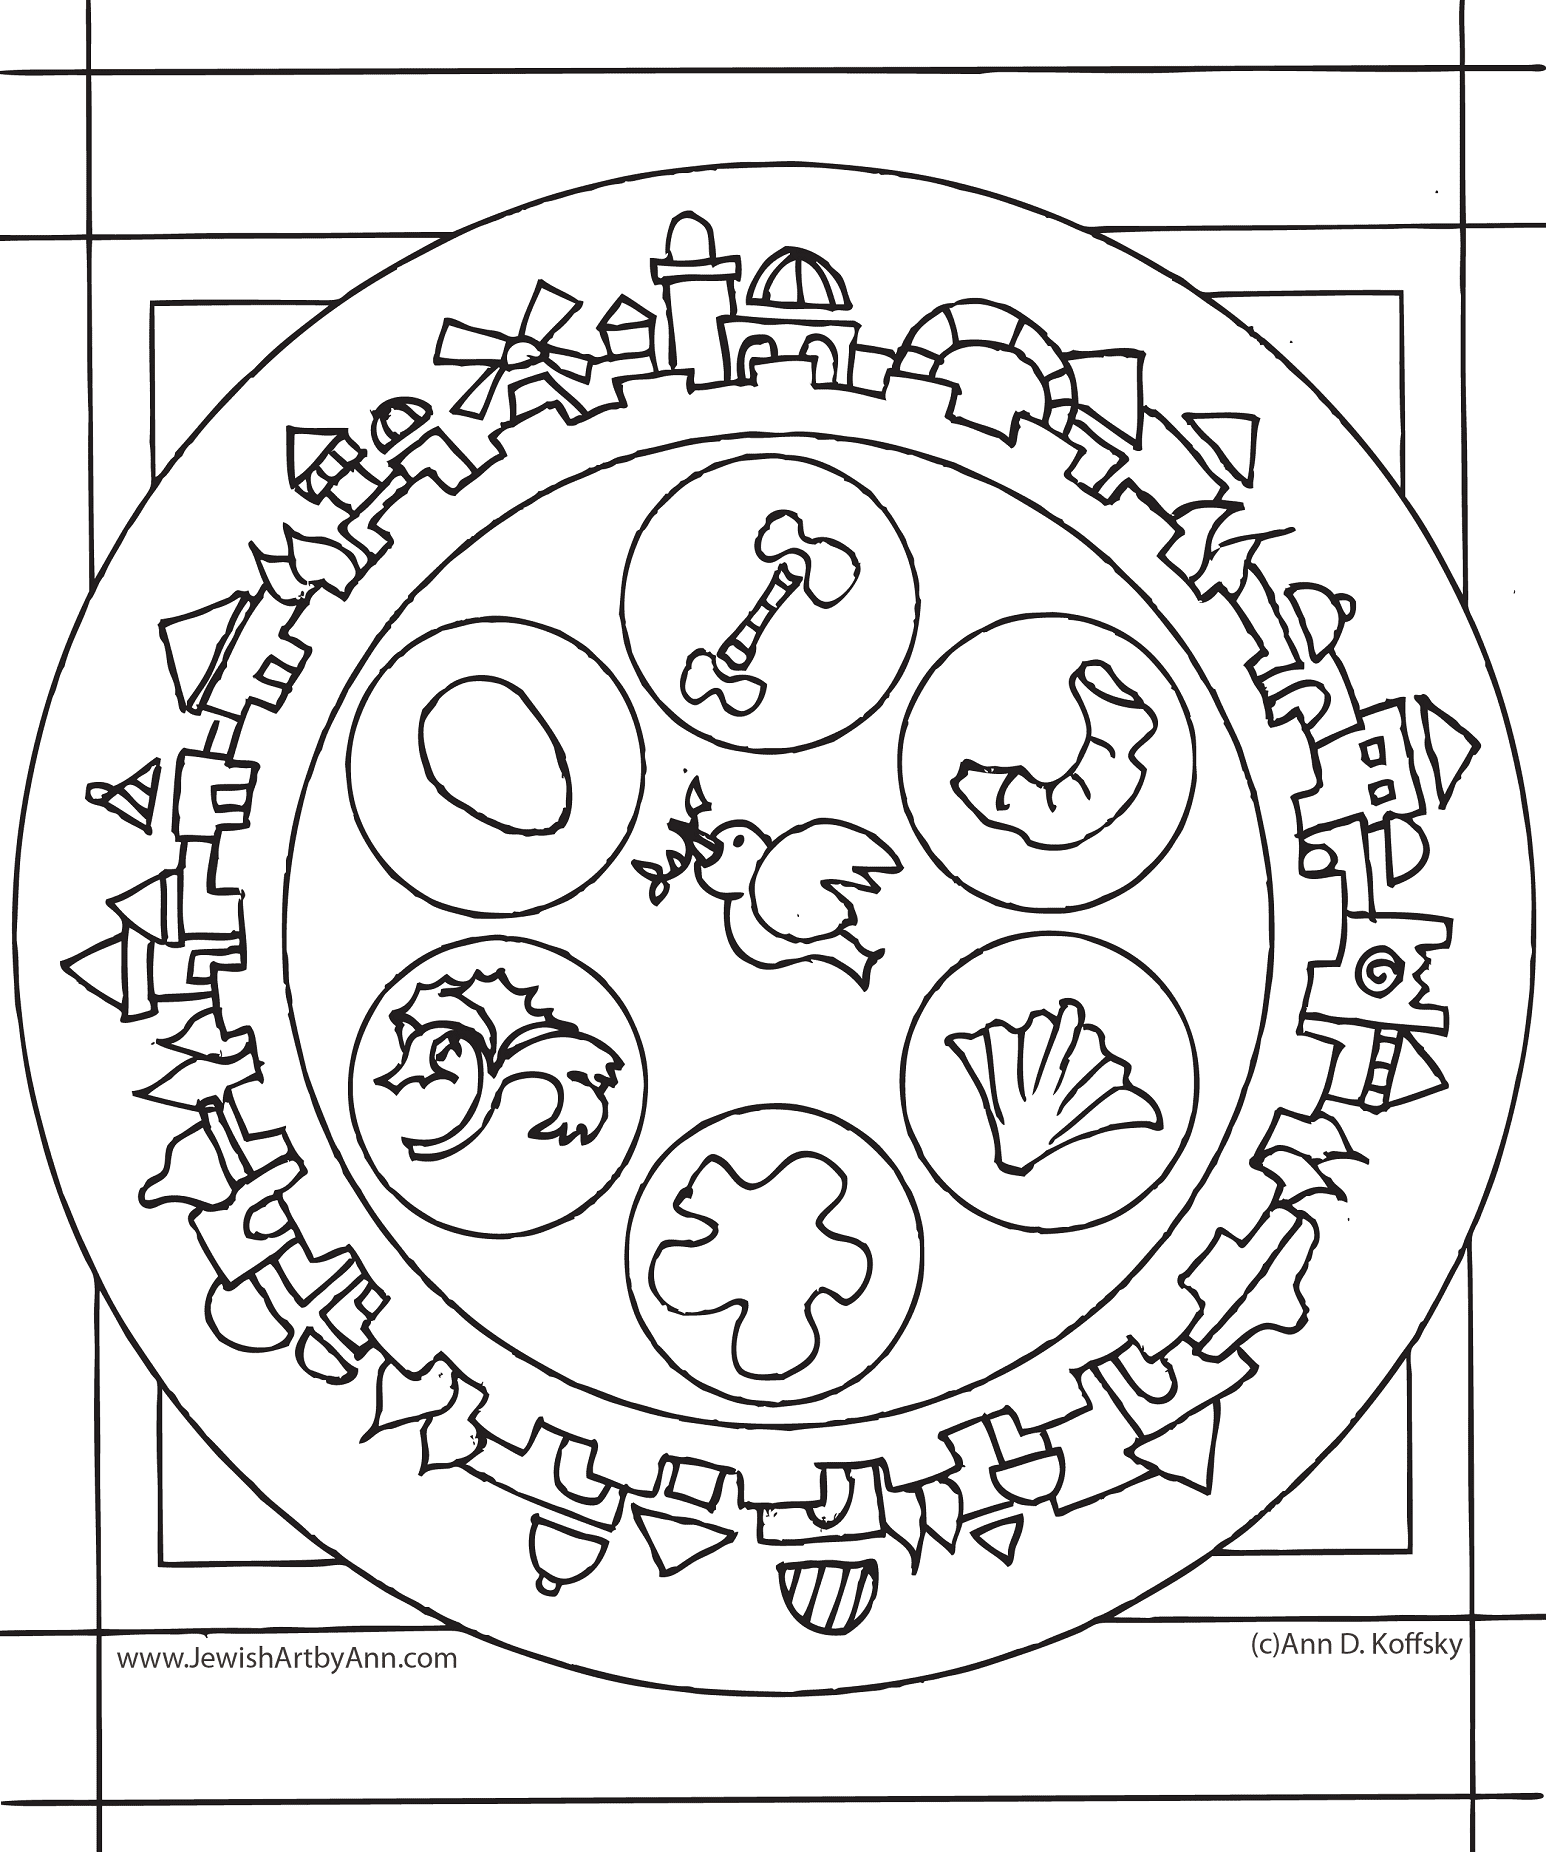 Passover coloring pages printable for free download